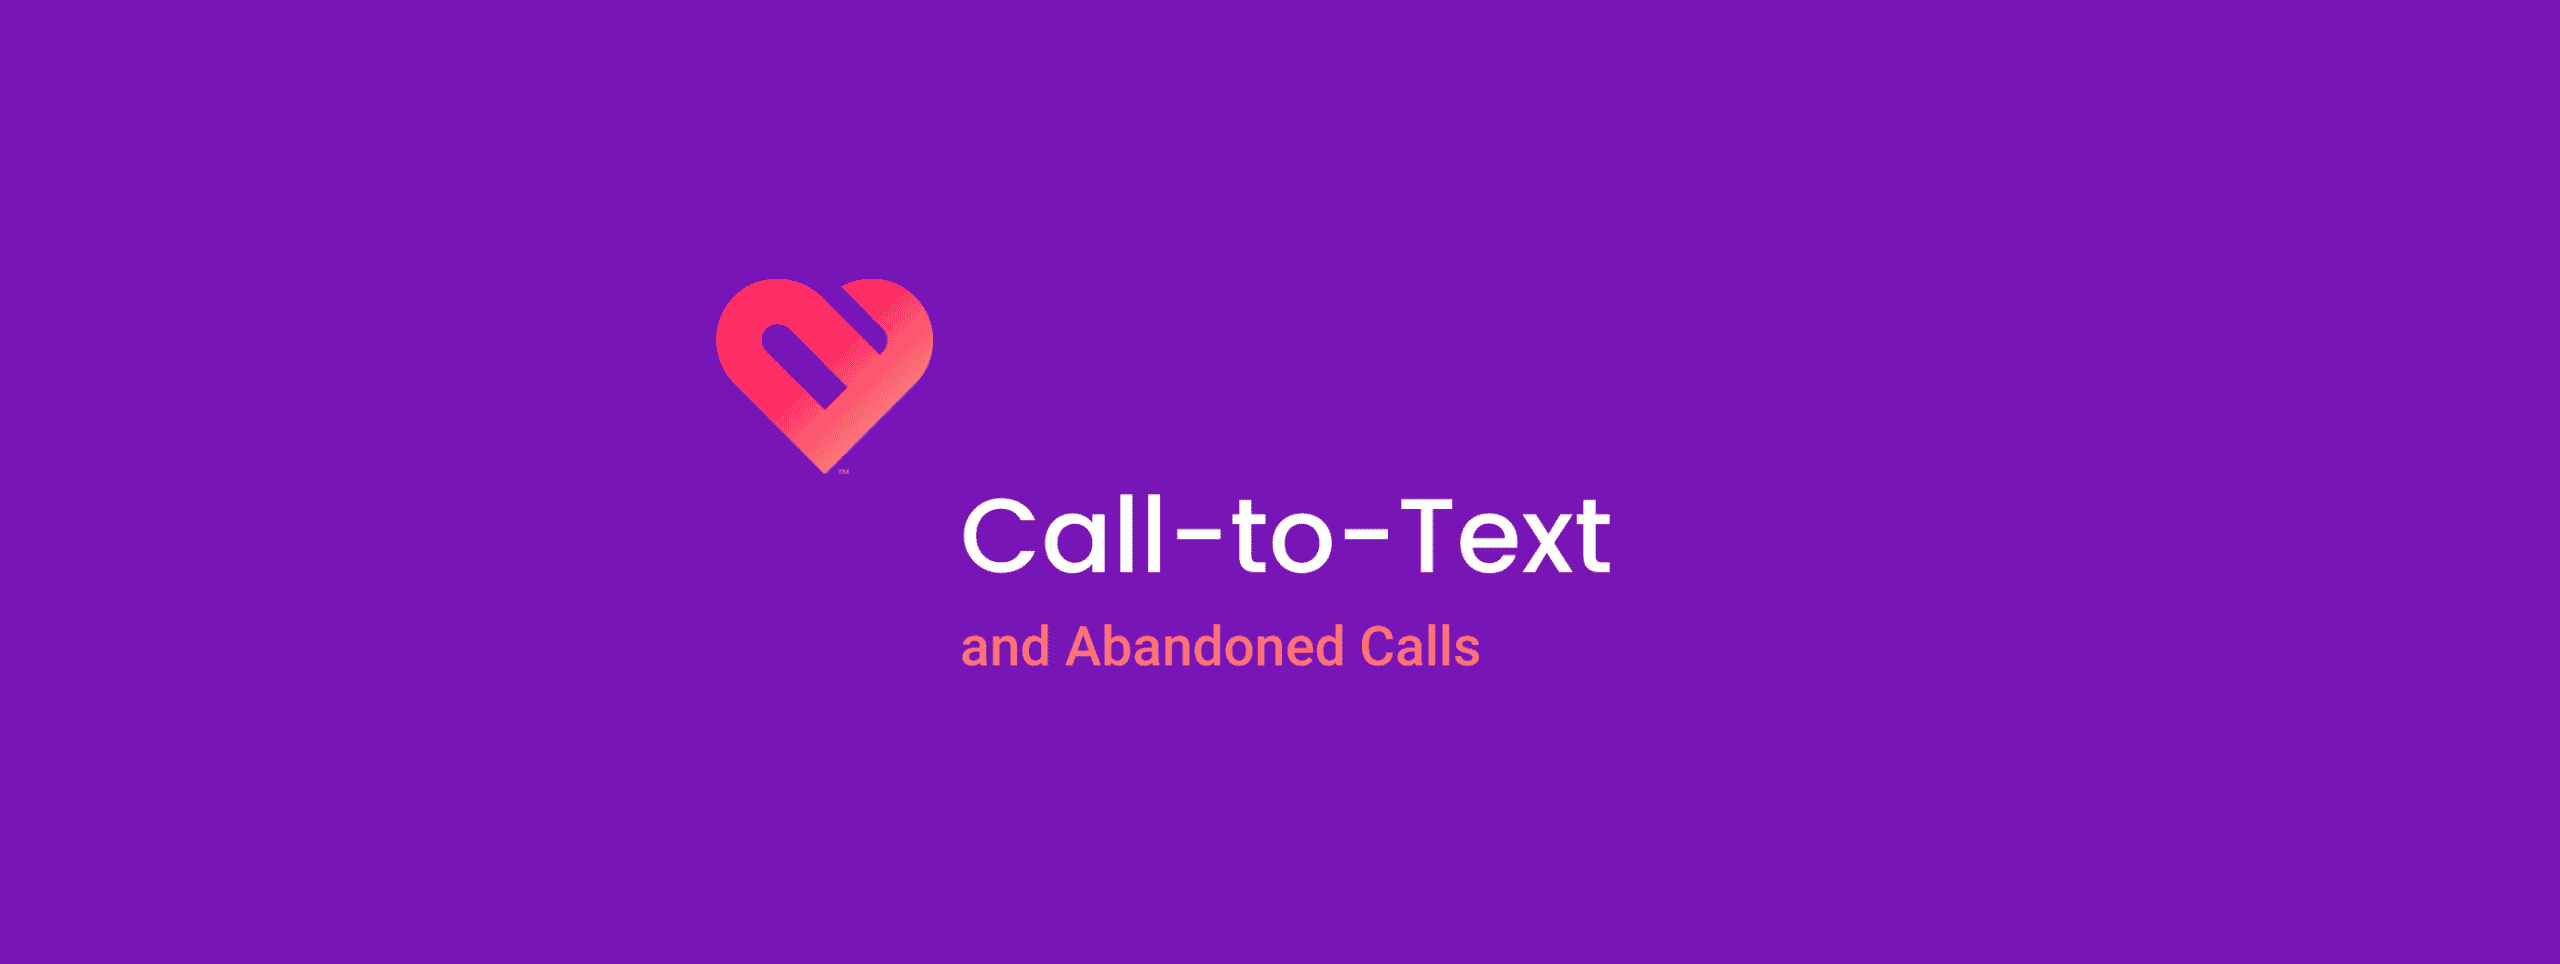 Call-to-Text and abandoned calls header